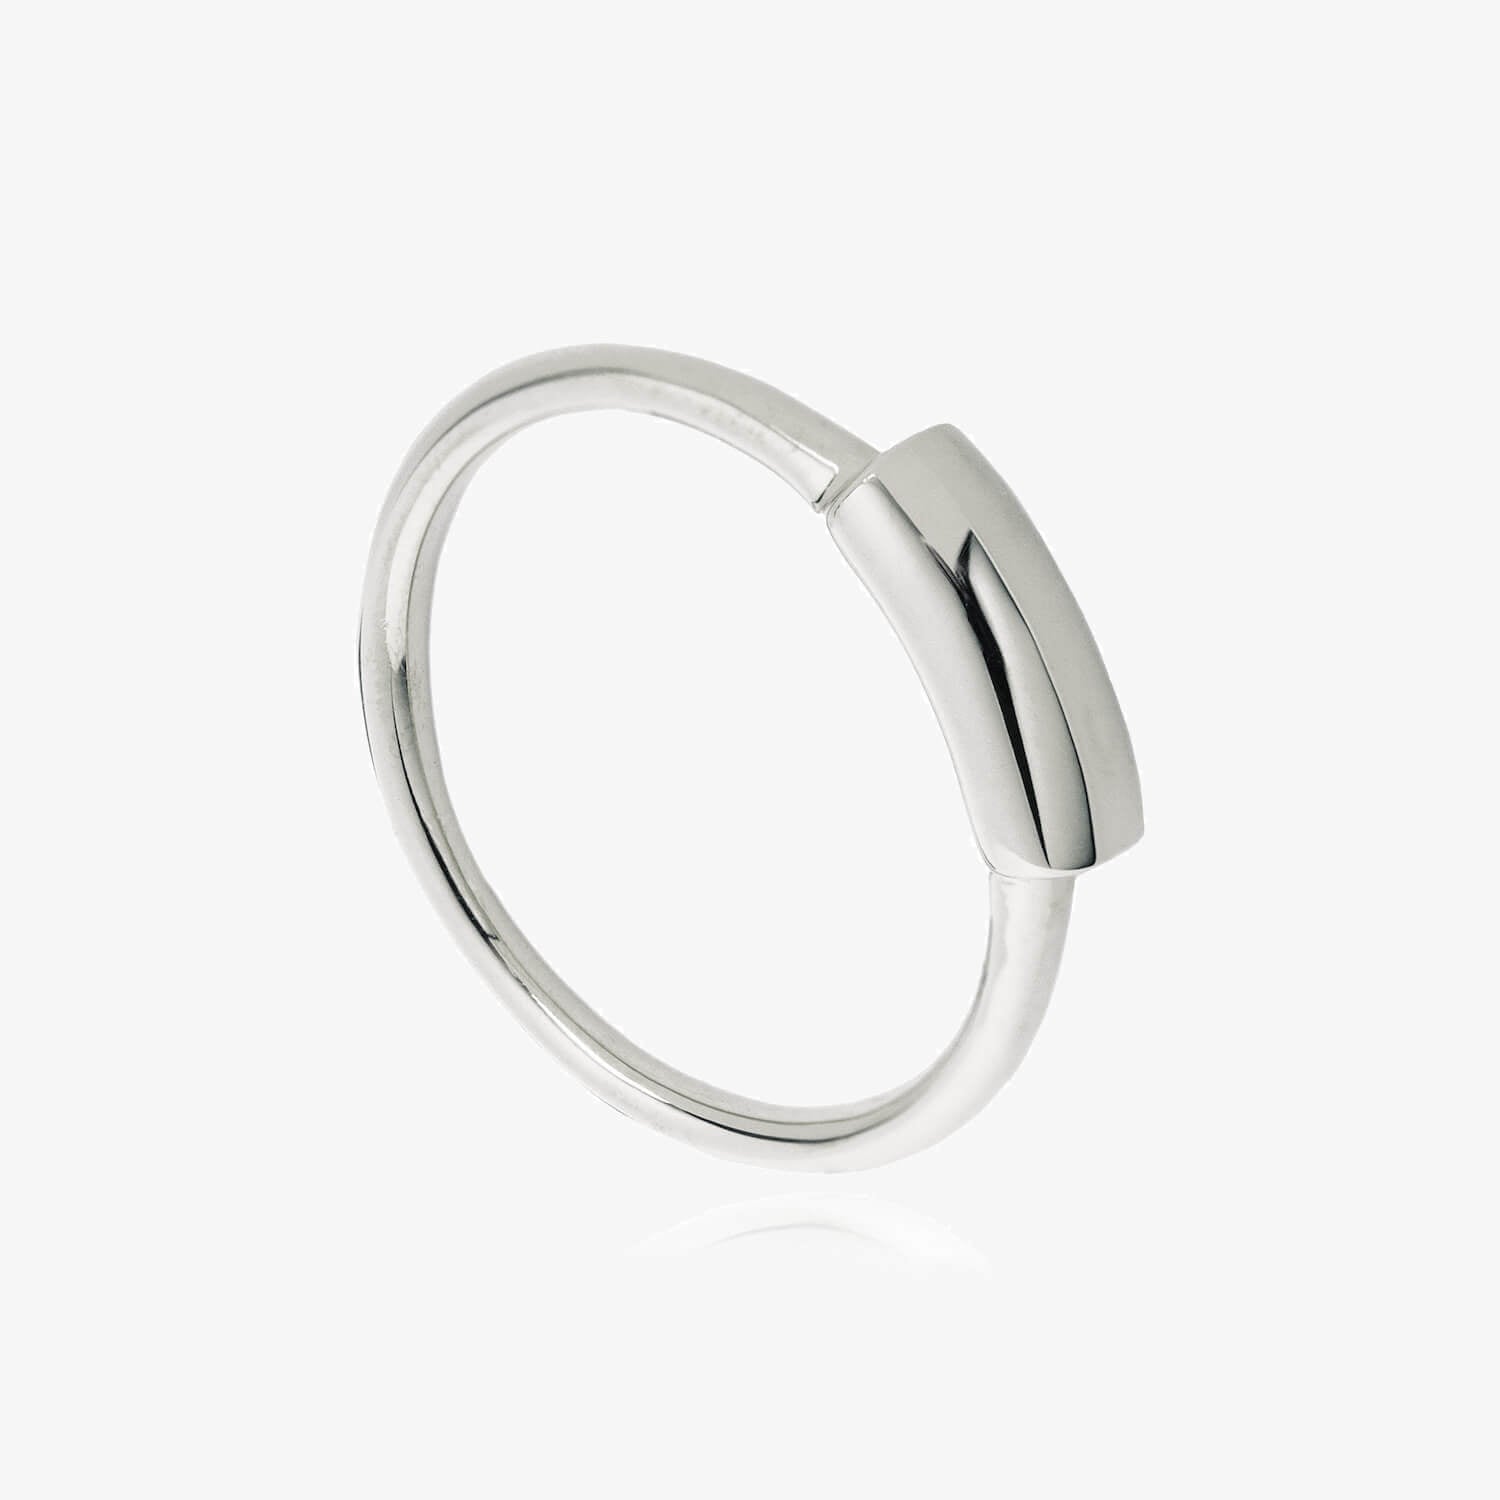 Close up of silver ring with thick wire signet detail on a white background